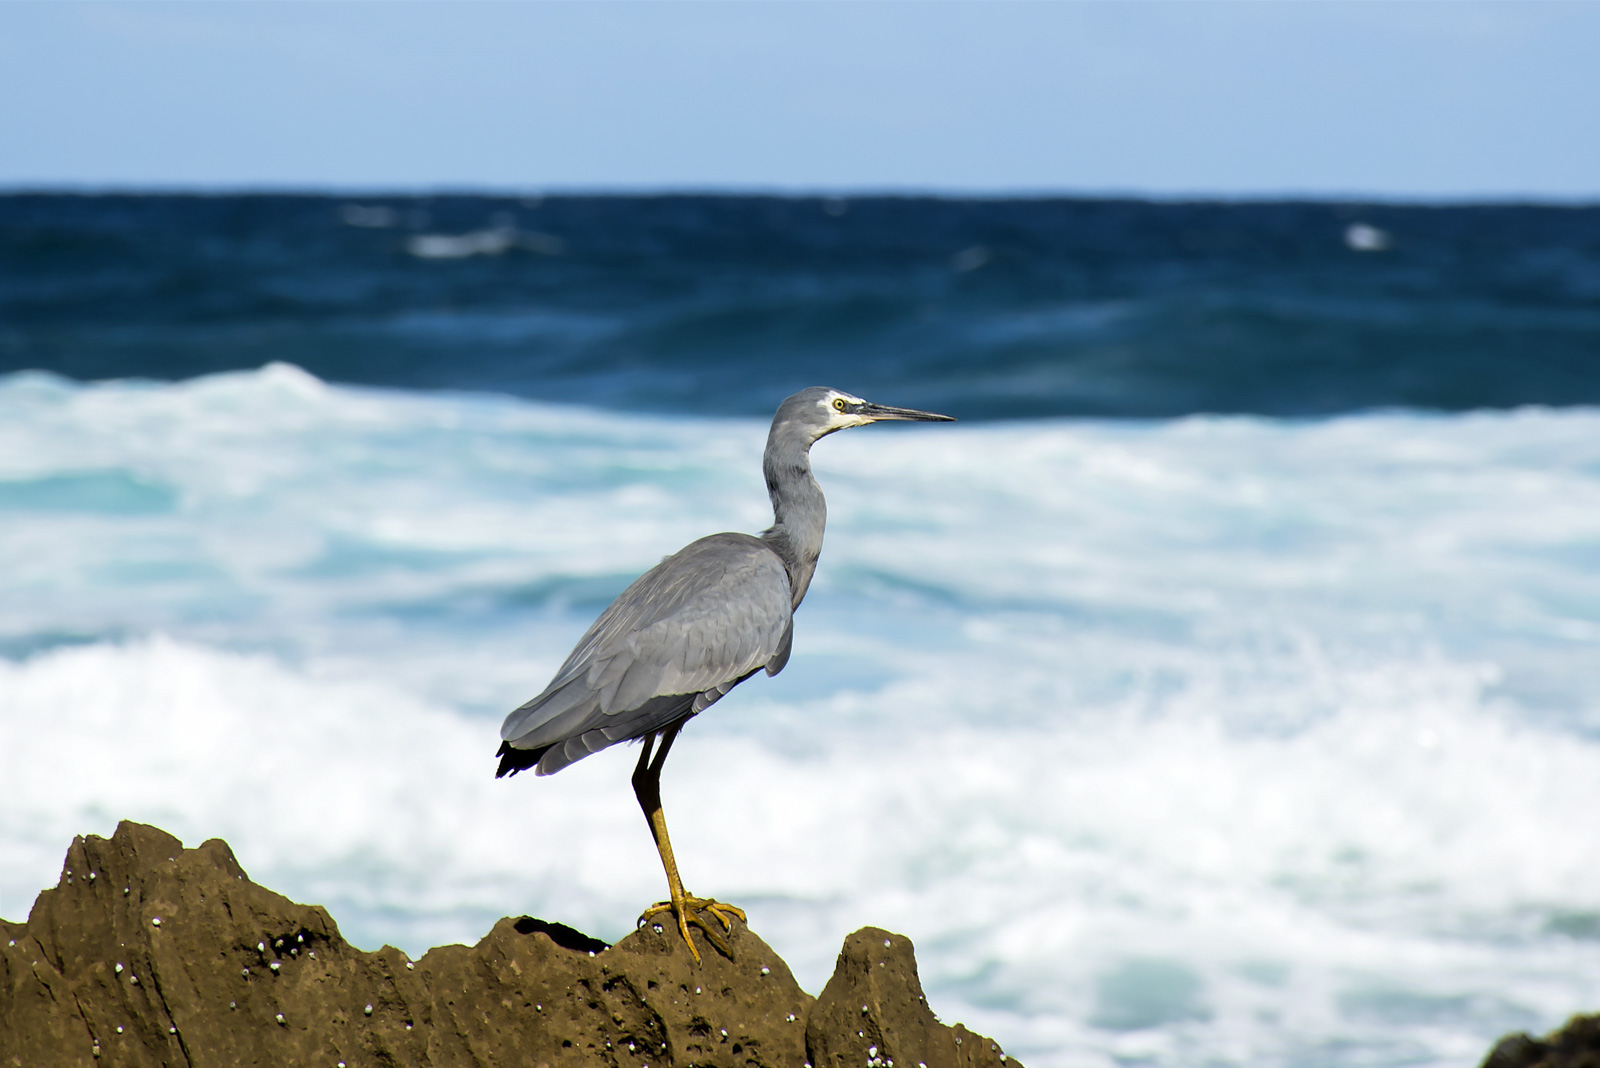 White faced heron hunting at the beach, Sydney Australia